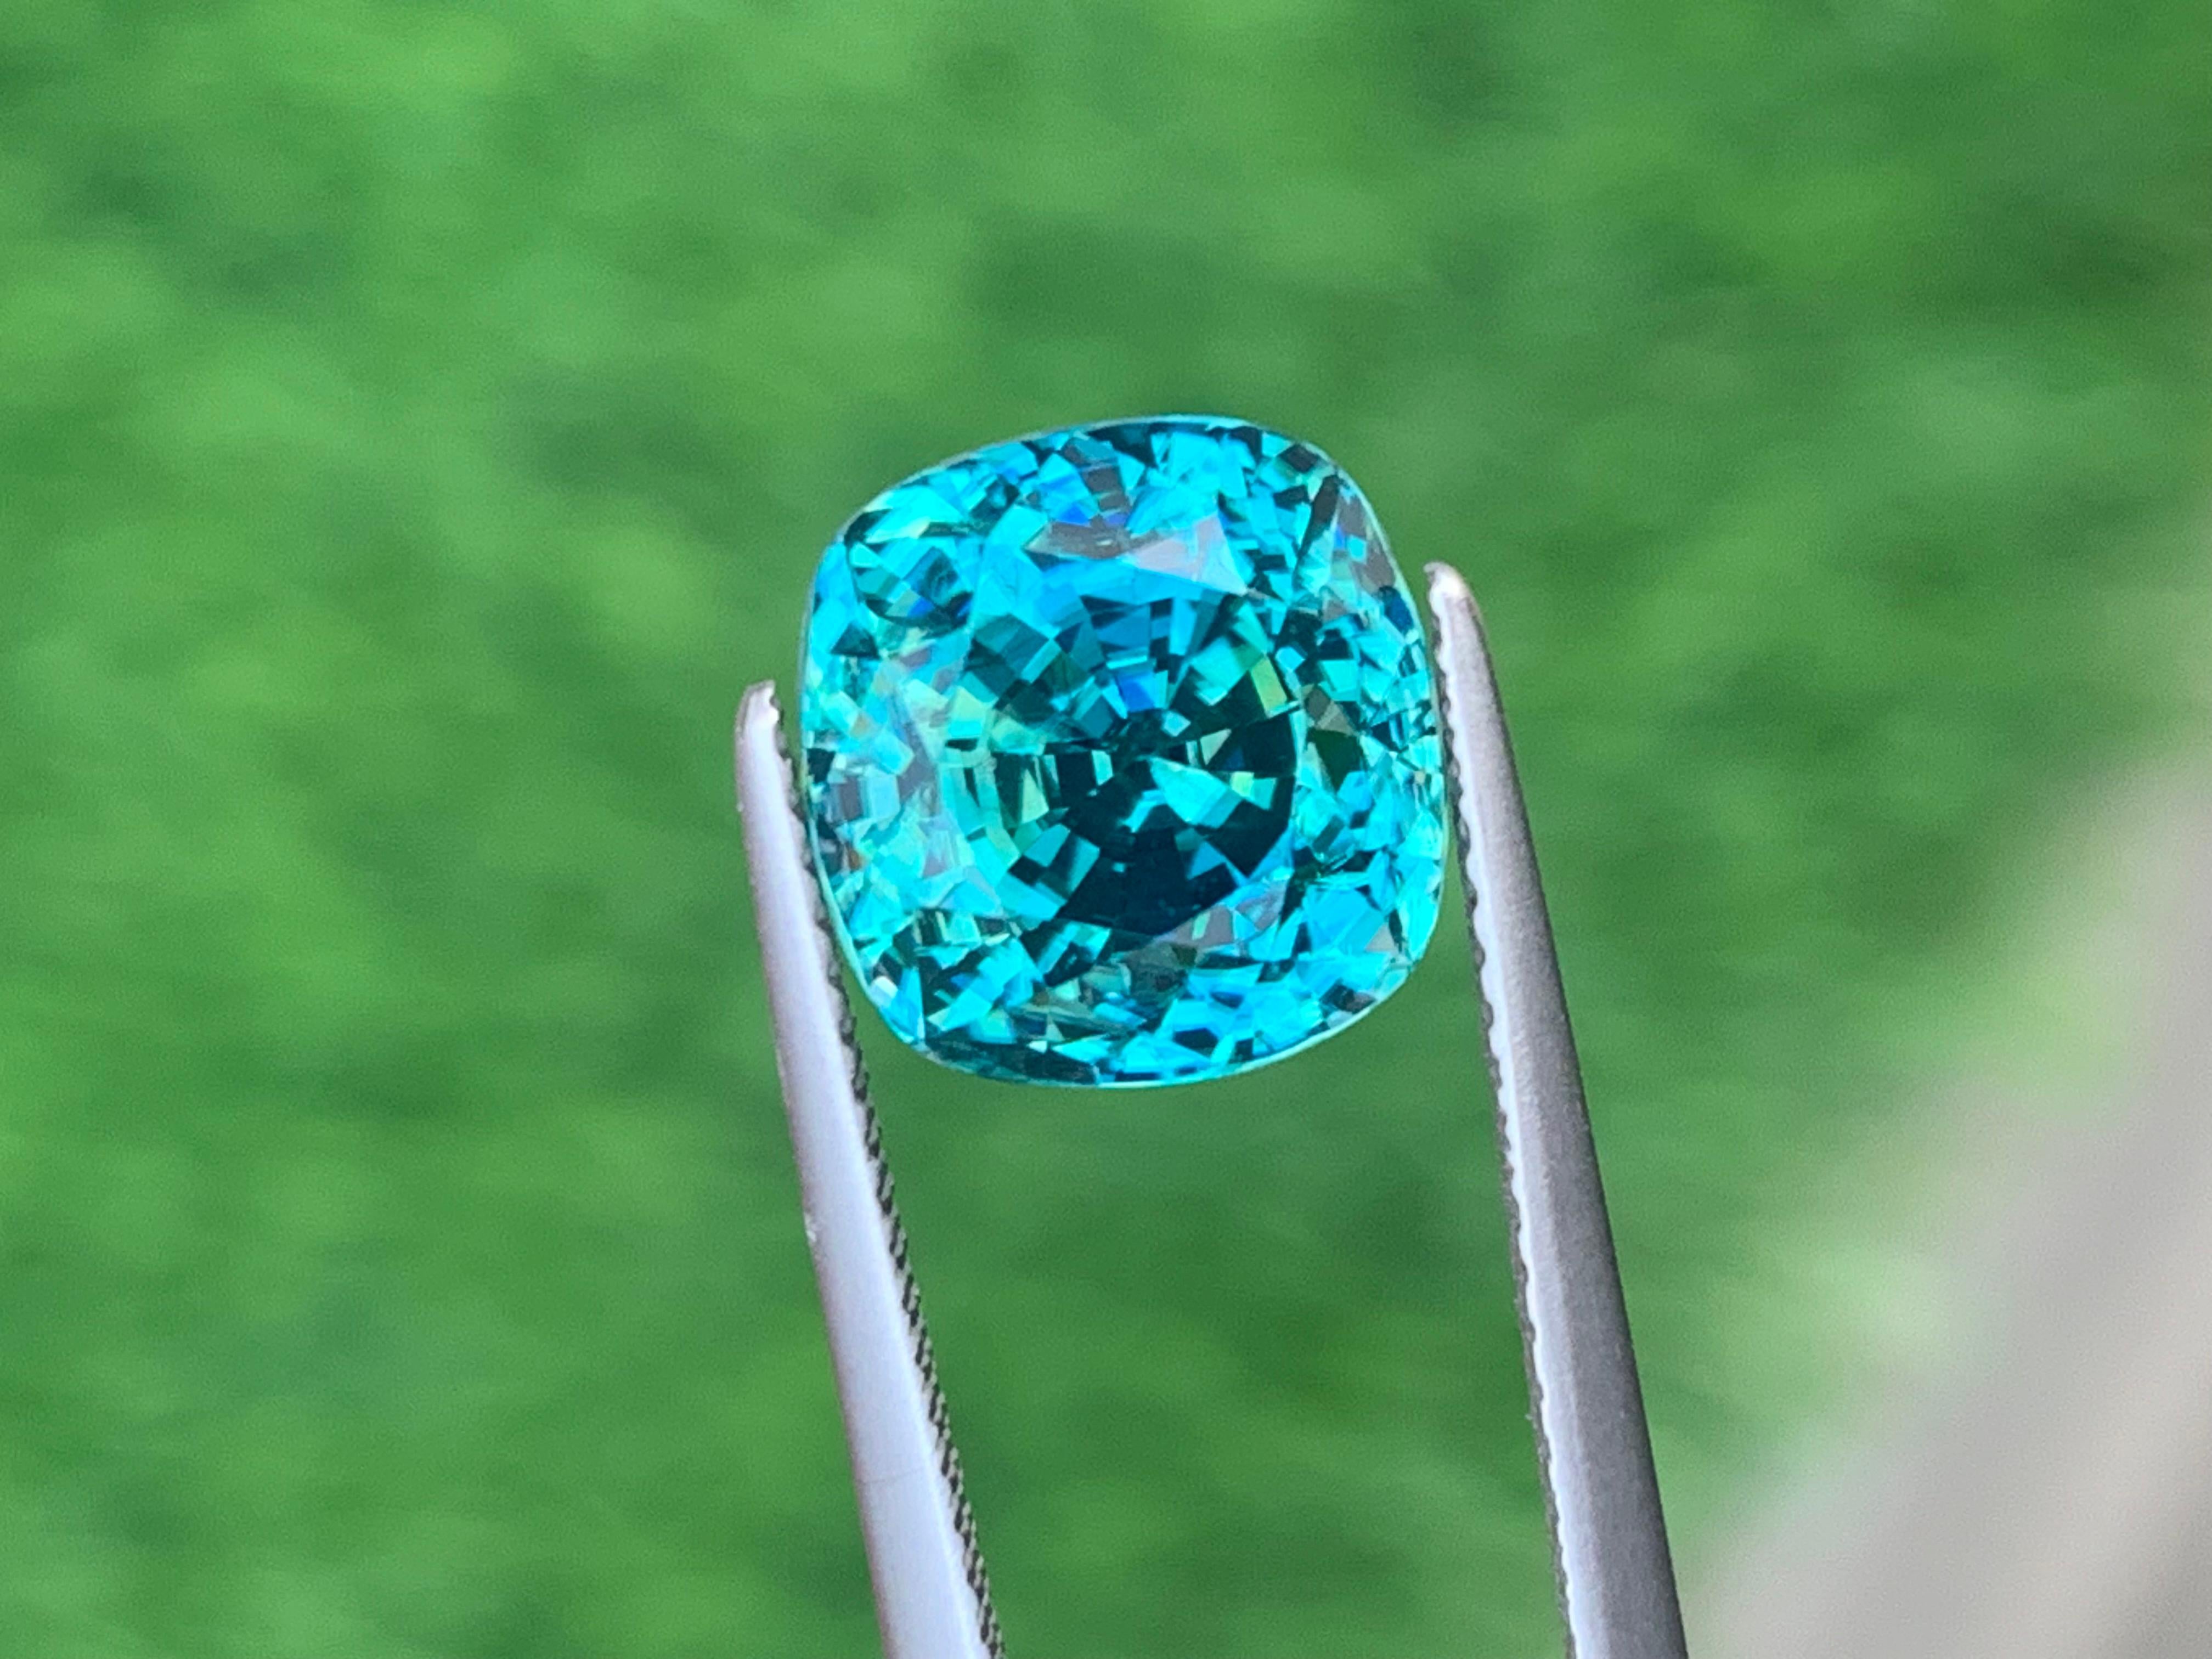 8.55 Carat Majestic Natural Loose Blue Zircon From Cambodia For Jewelry Making For Sale 1